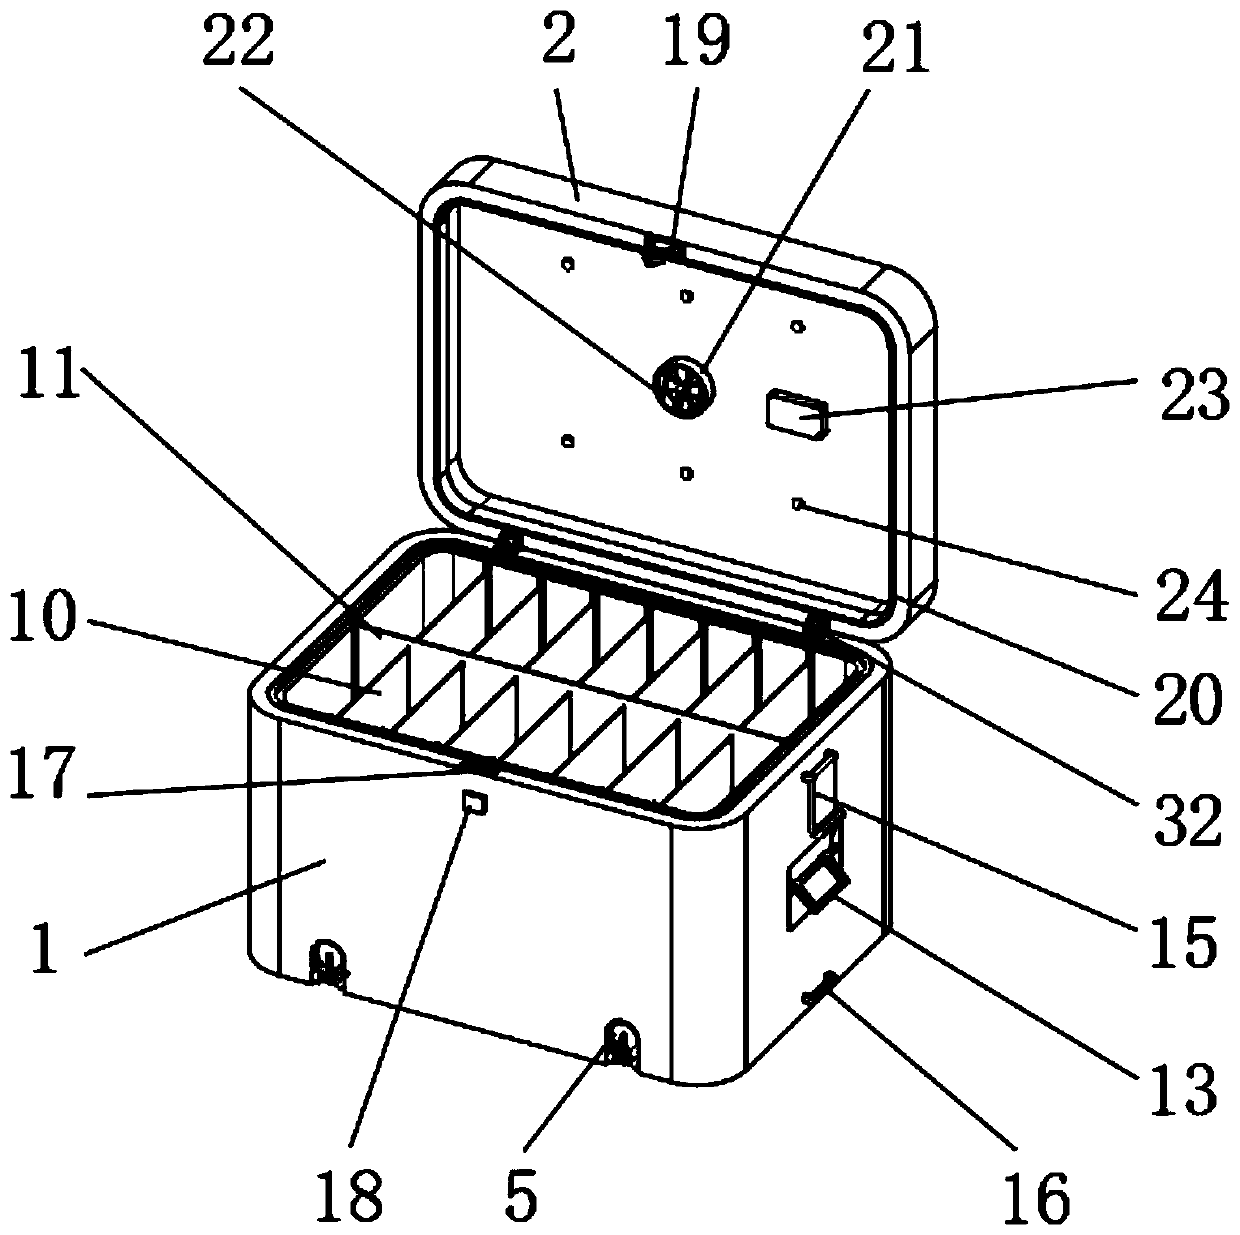 Storage and transportation box for containing pre-packaged food